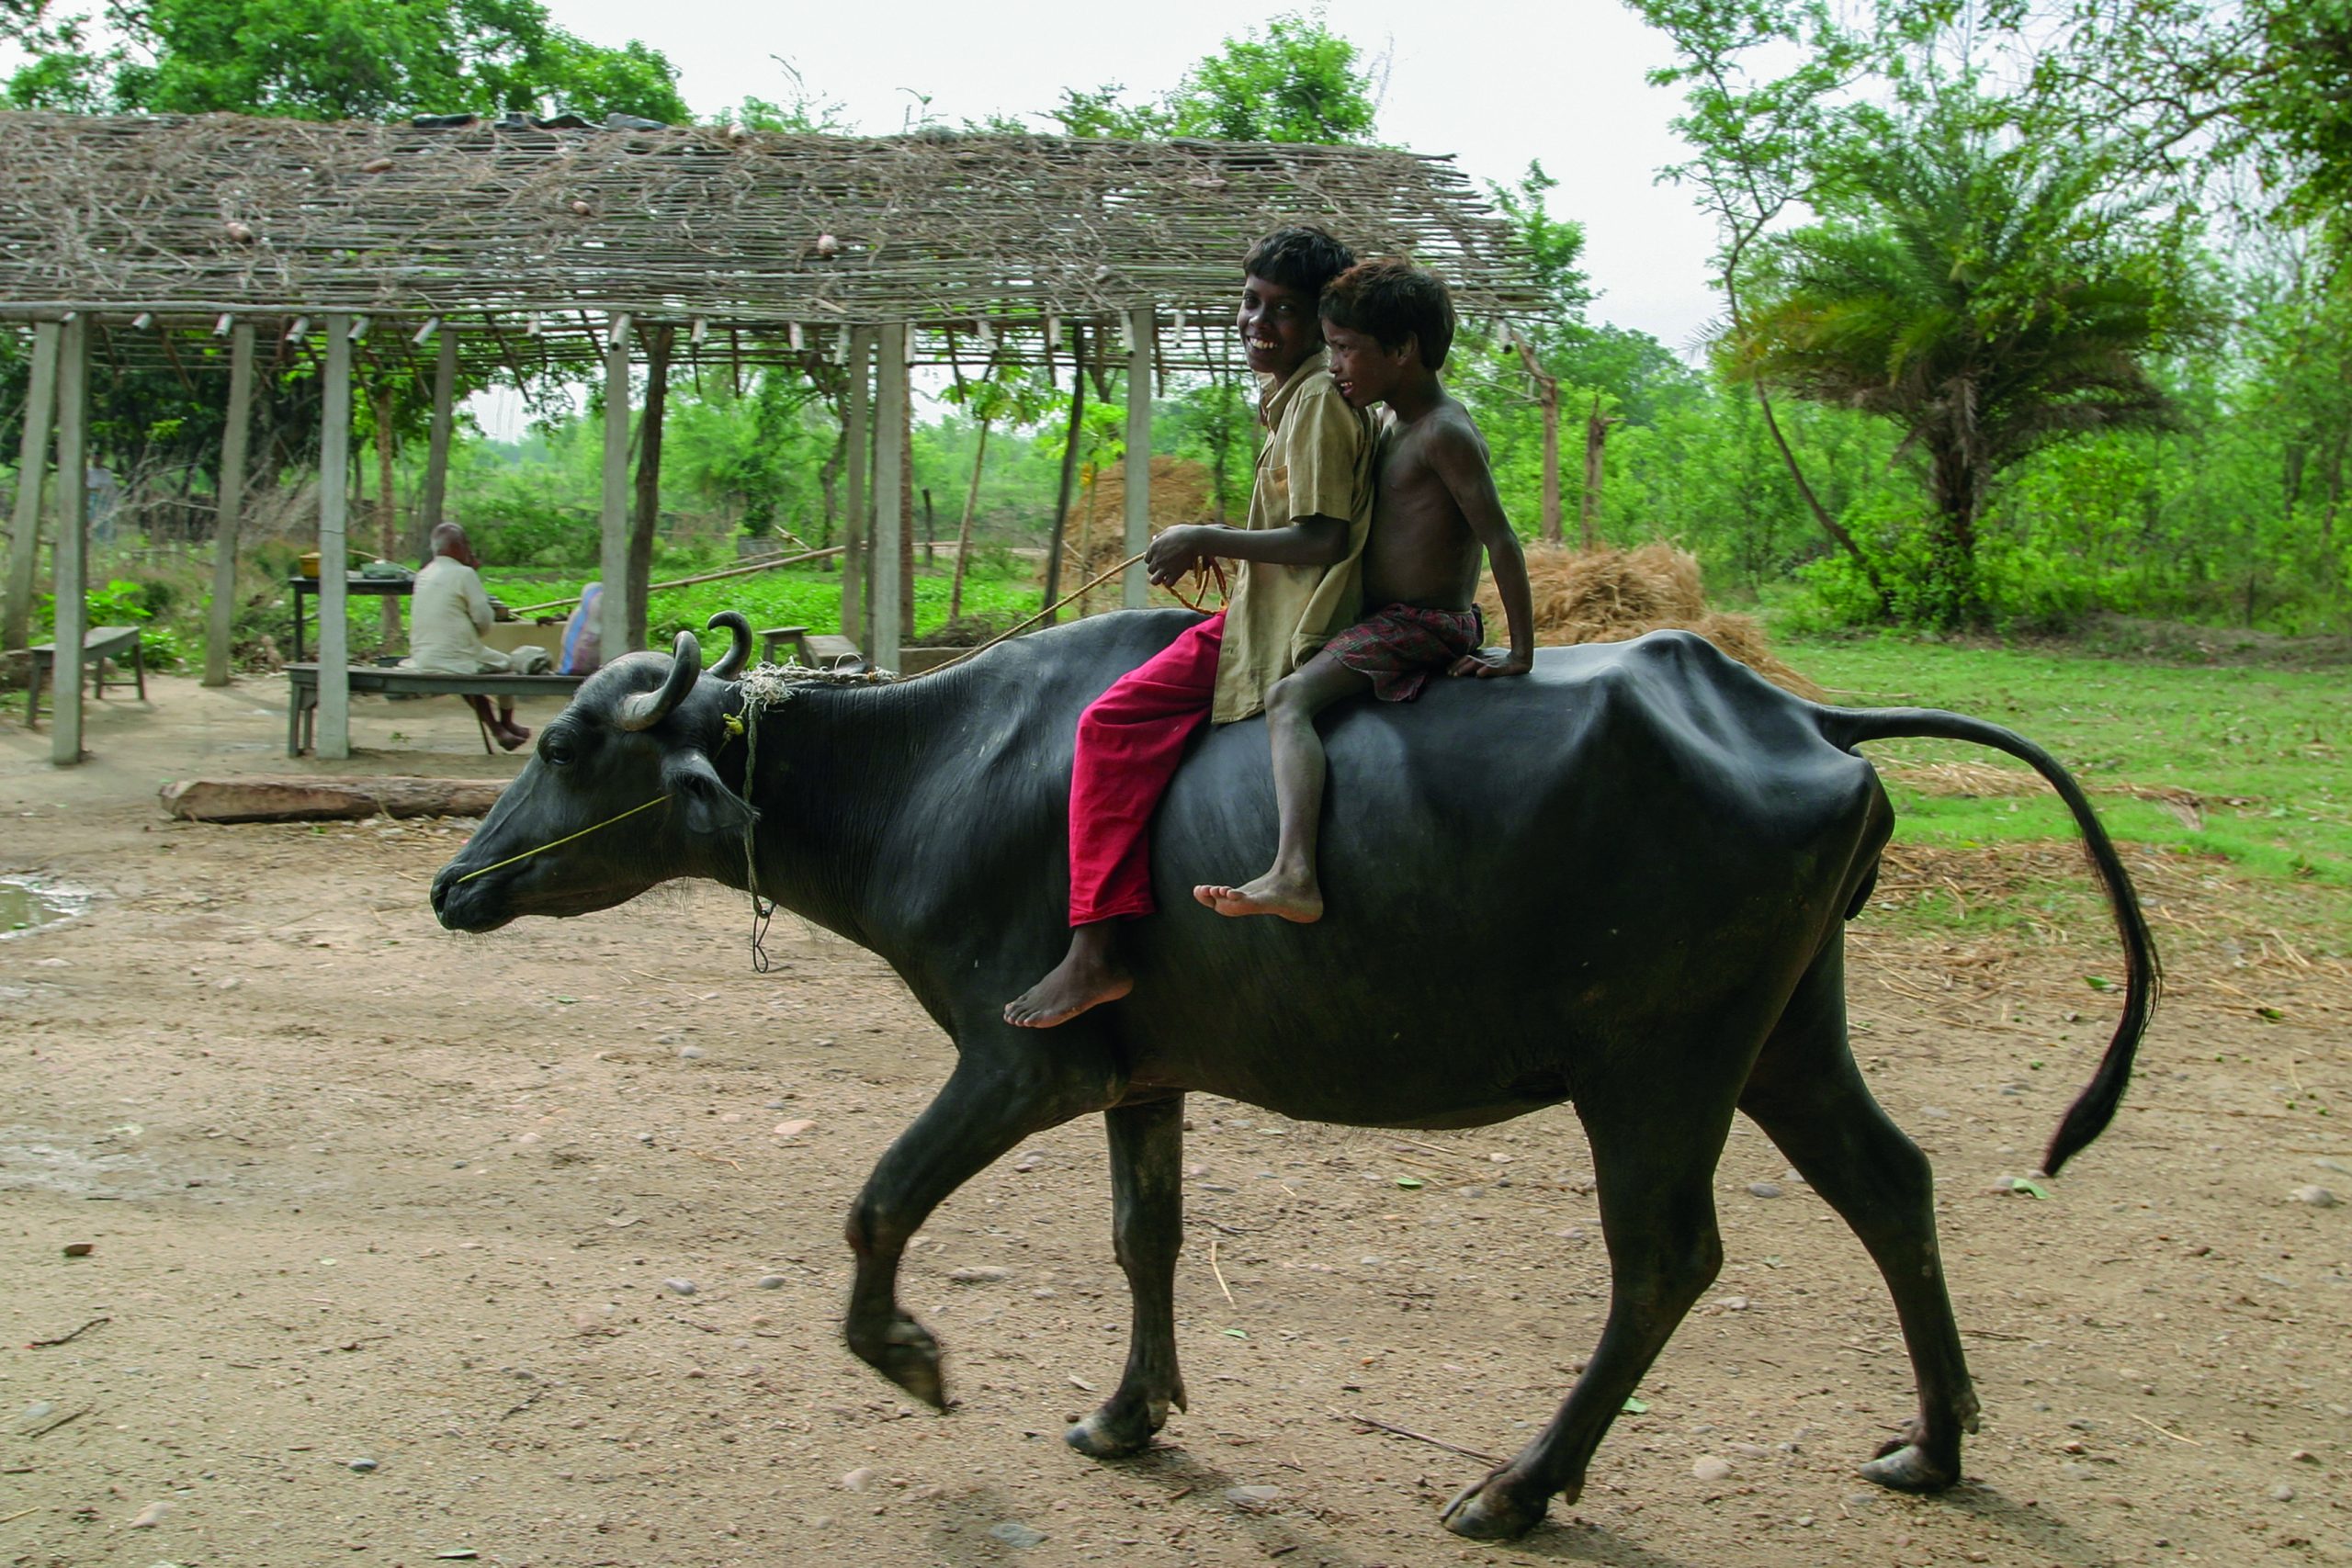 Two happy boys are riding a water buffalo. The animal is quite skinny. There is a wooden canopy in the background.